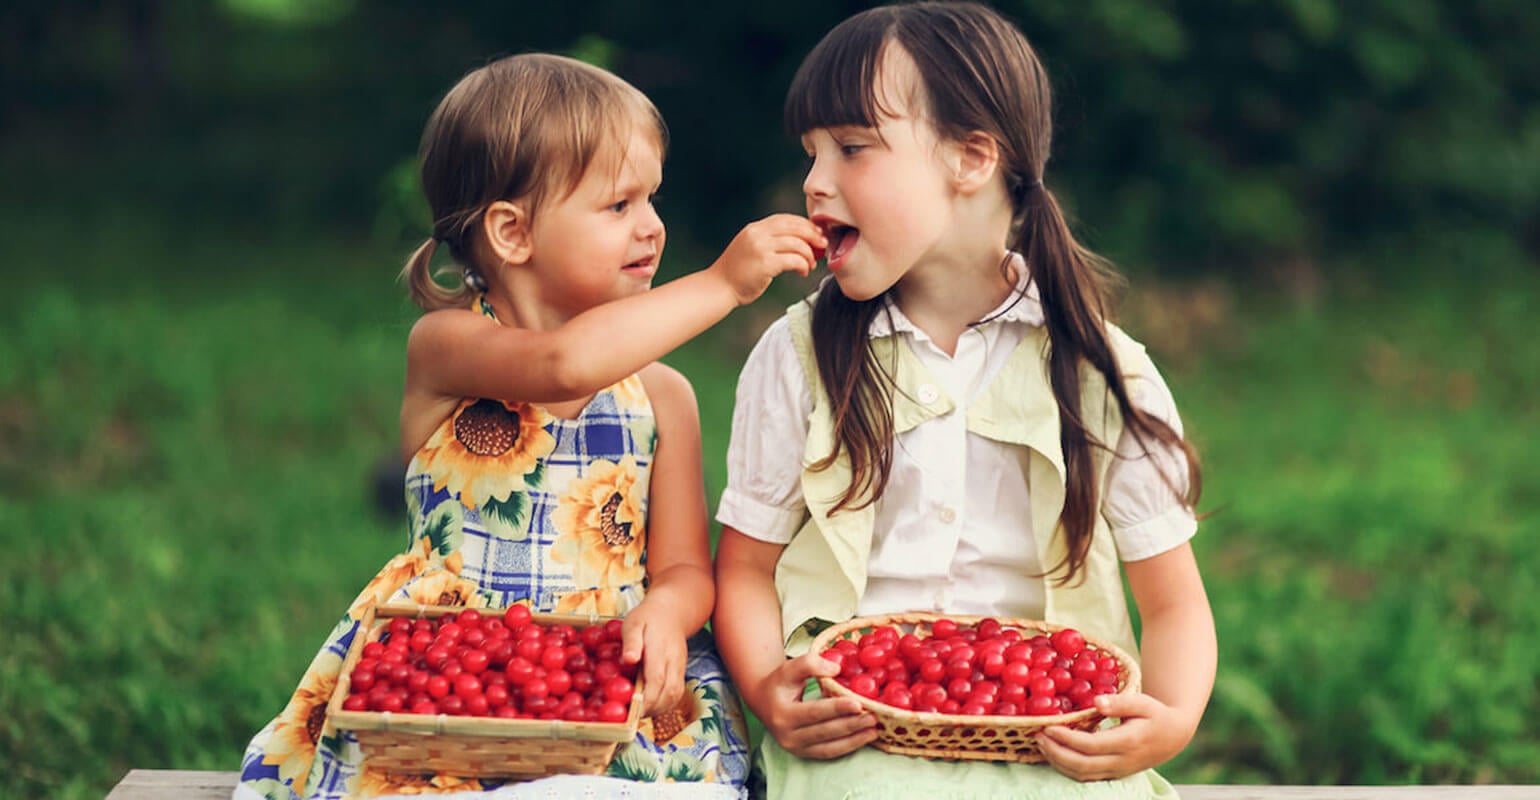 Two young girls eating cherries.